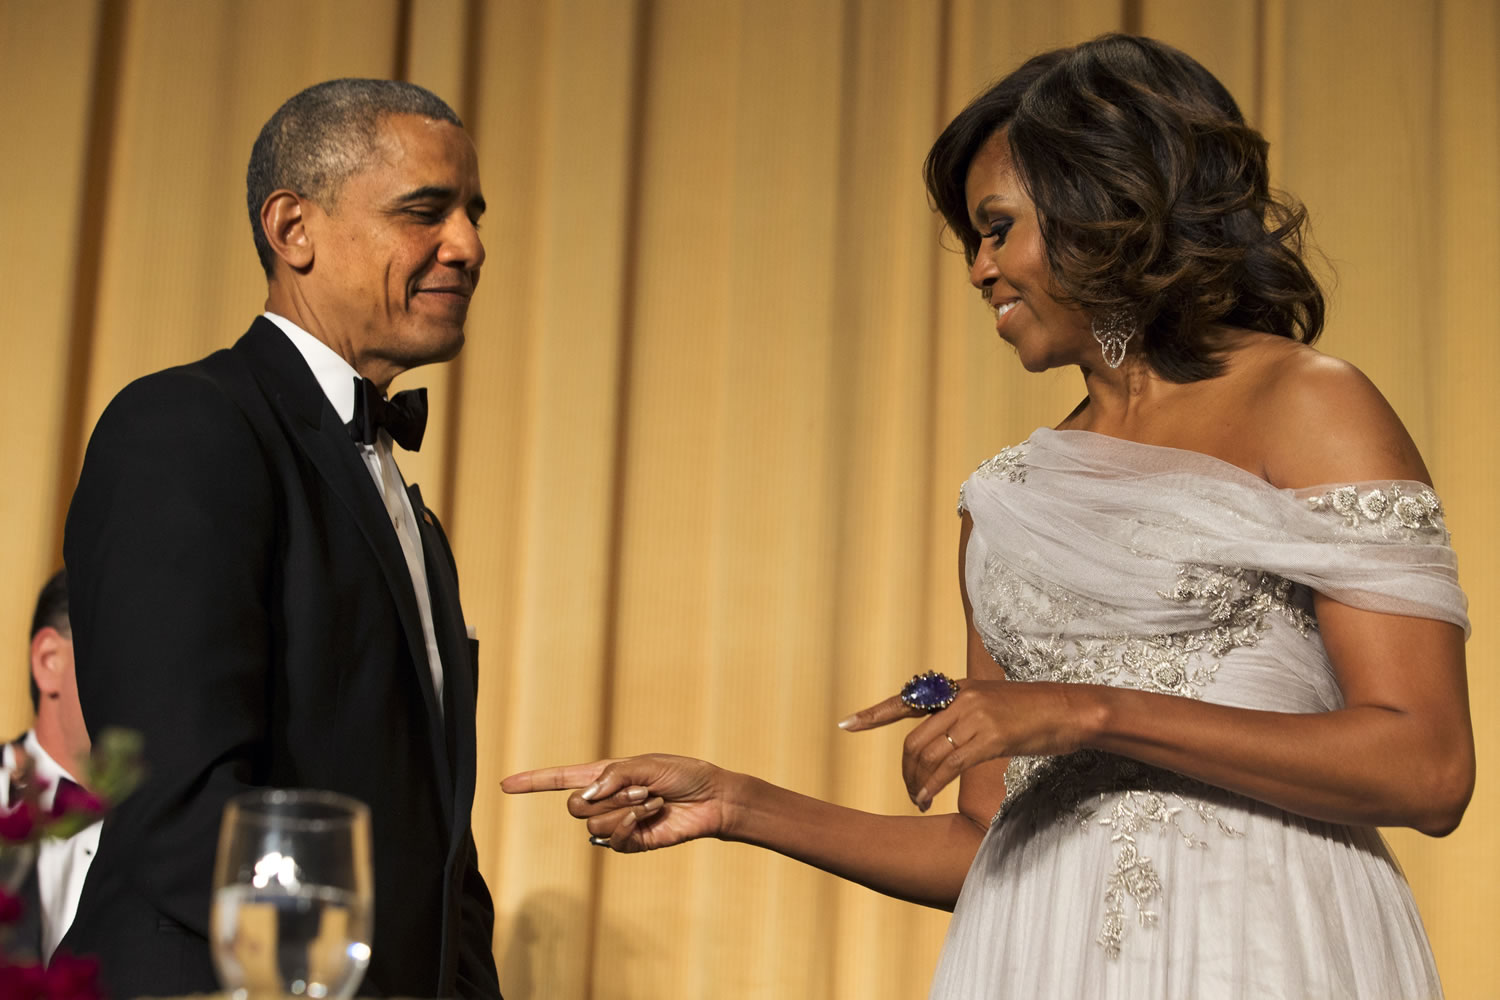 First lady Michelle Obama jokes with President Barack Obama on Saturday at the White House Correspondents' Association Dinner in Washington.